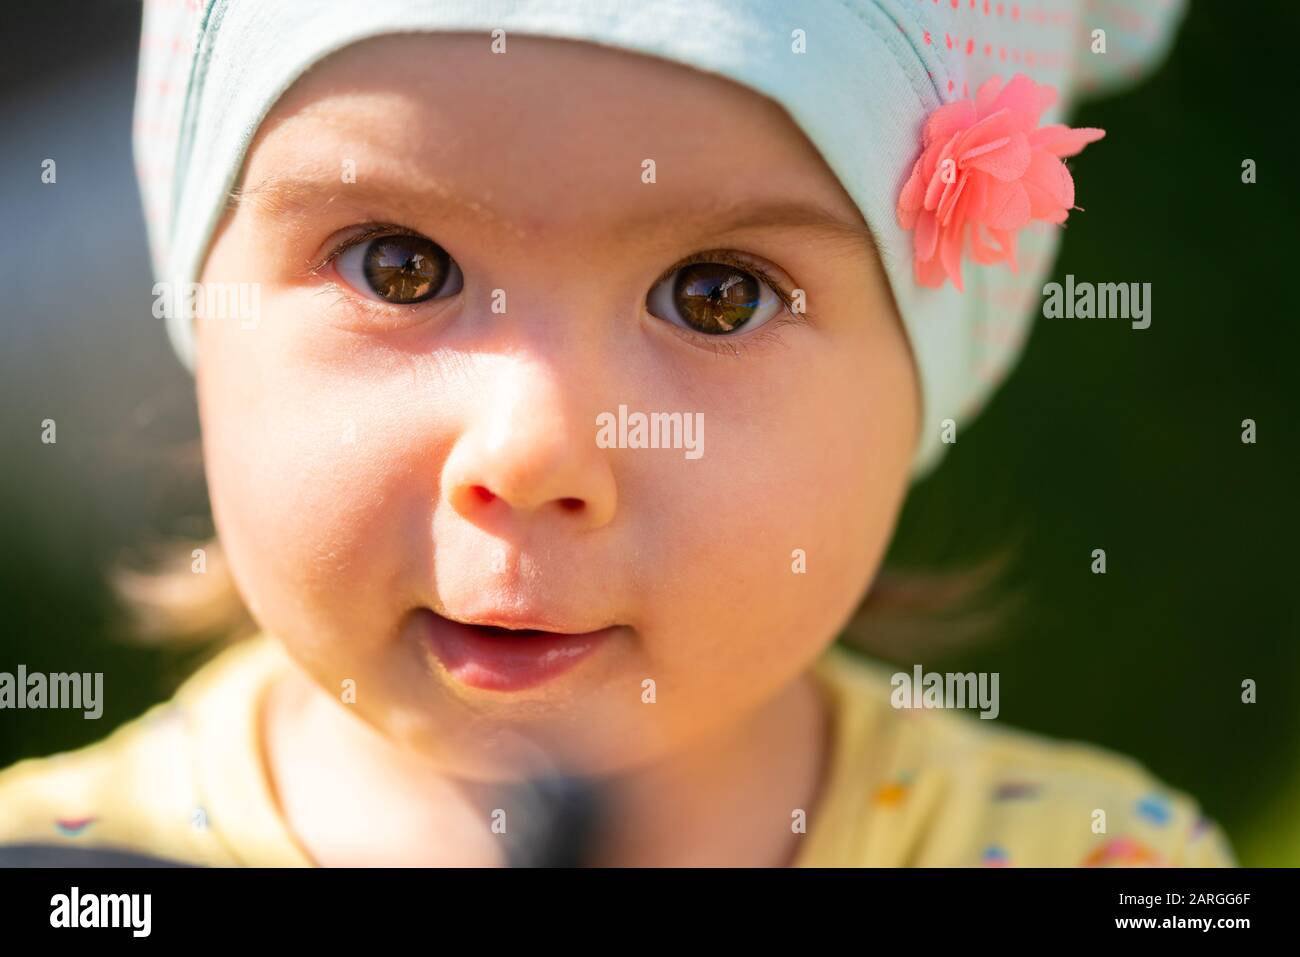 Portrait of very sweet little child with big eyes. 1 year old baby girl Stock Photo